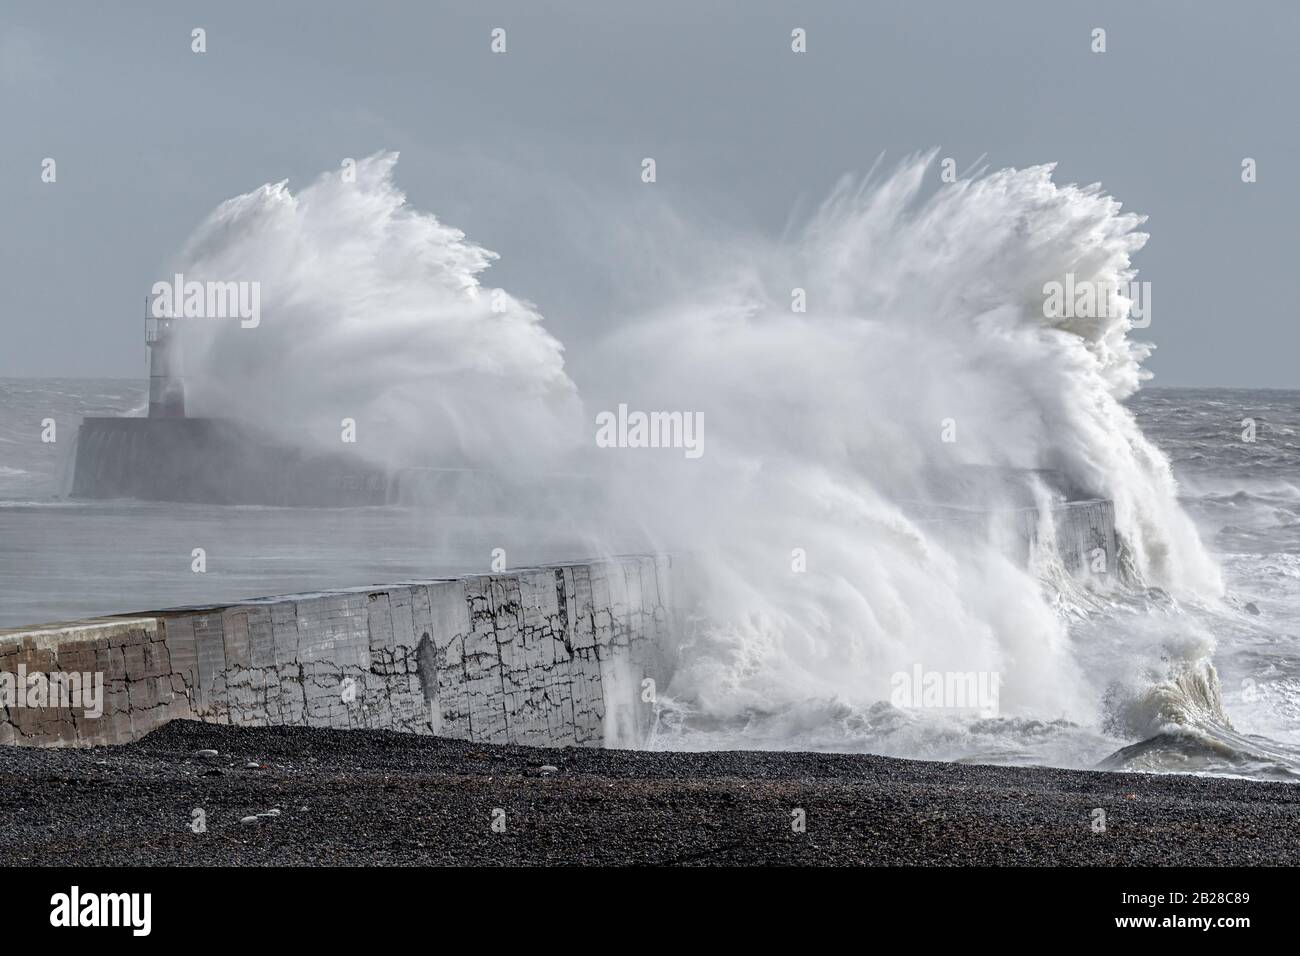 Newhaven, East Sussex on 29th February 2020. Storm Jorge batters England bringing high winds and rain. Stock Photo